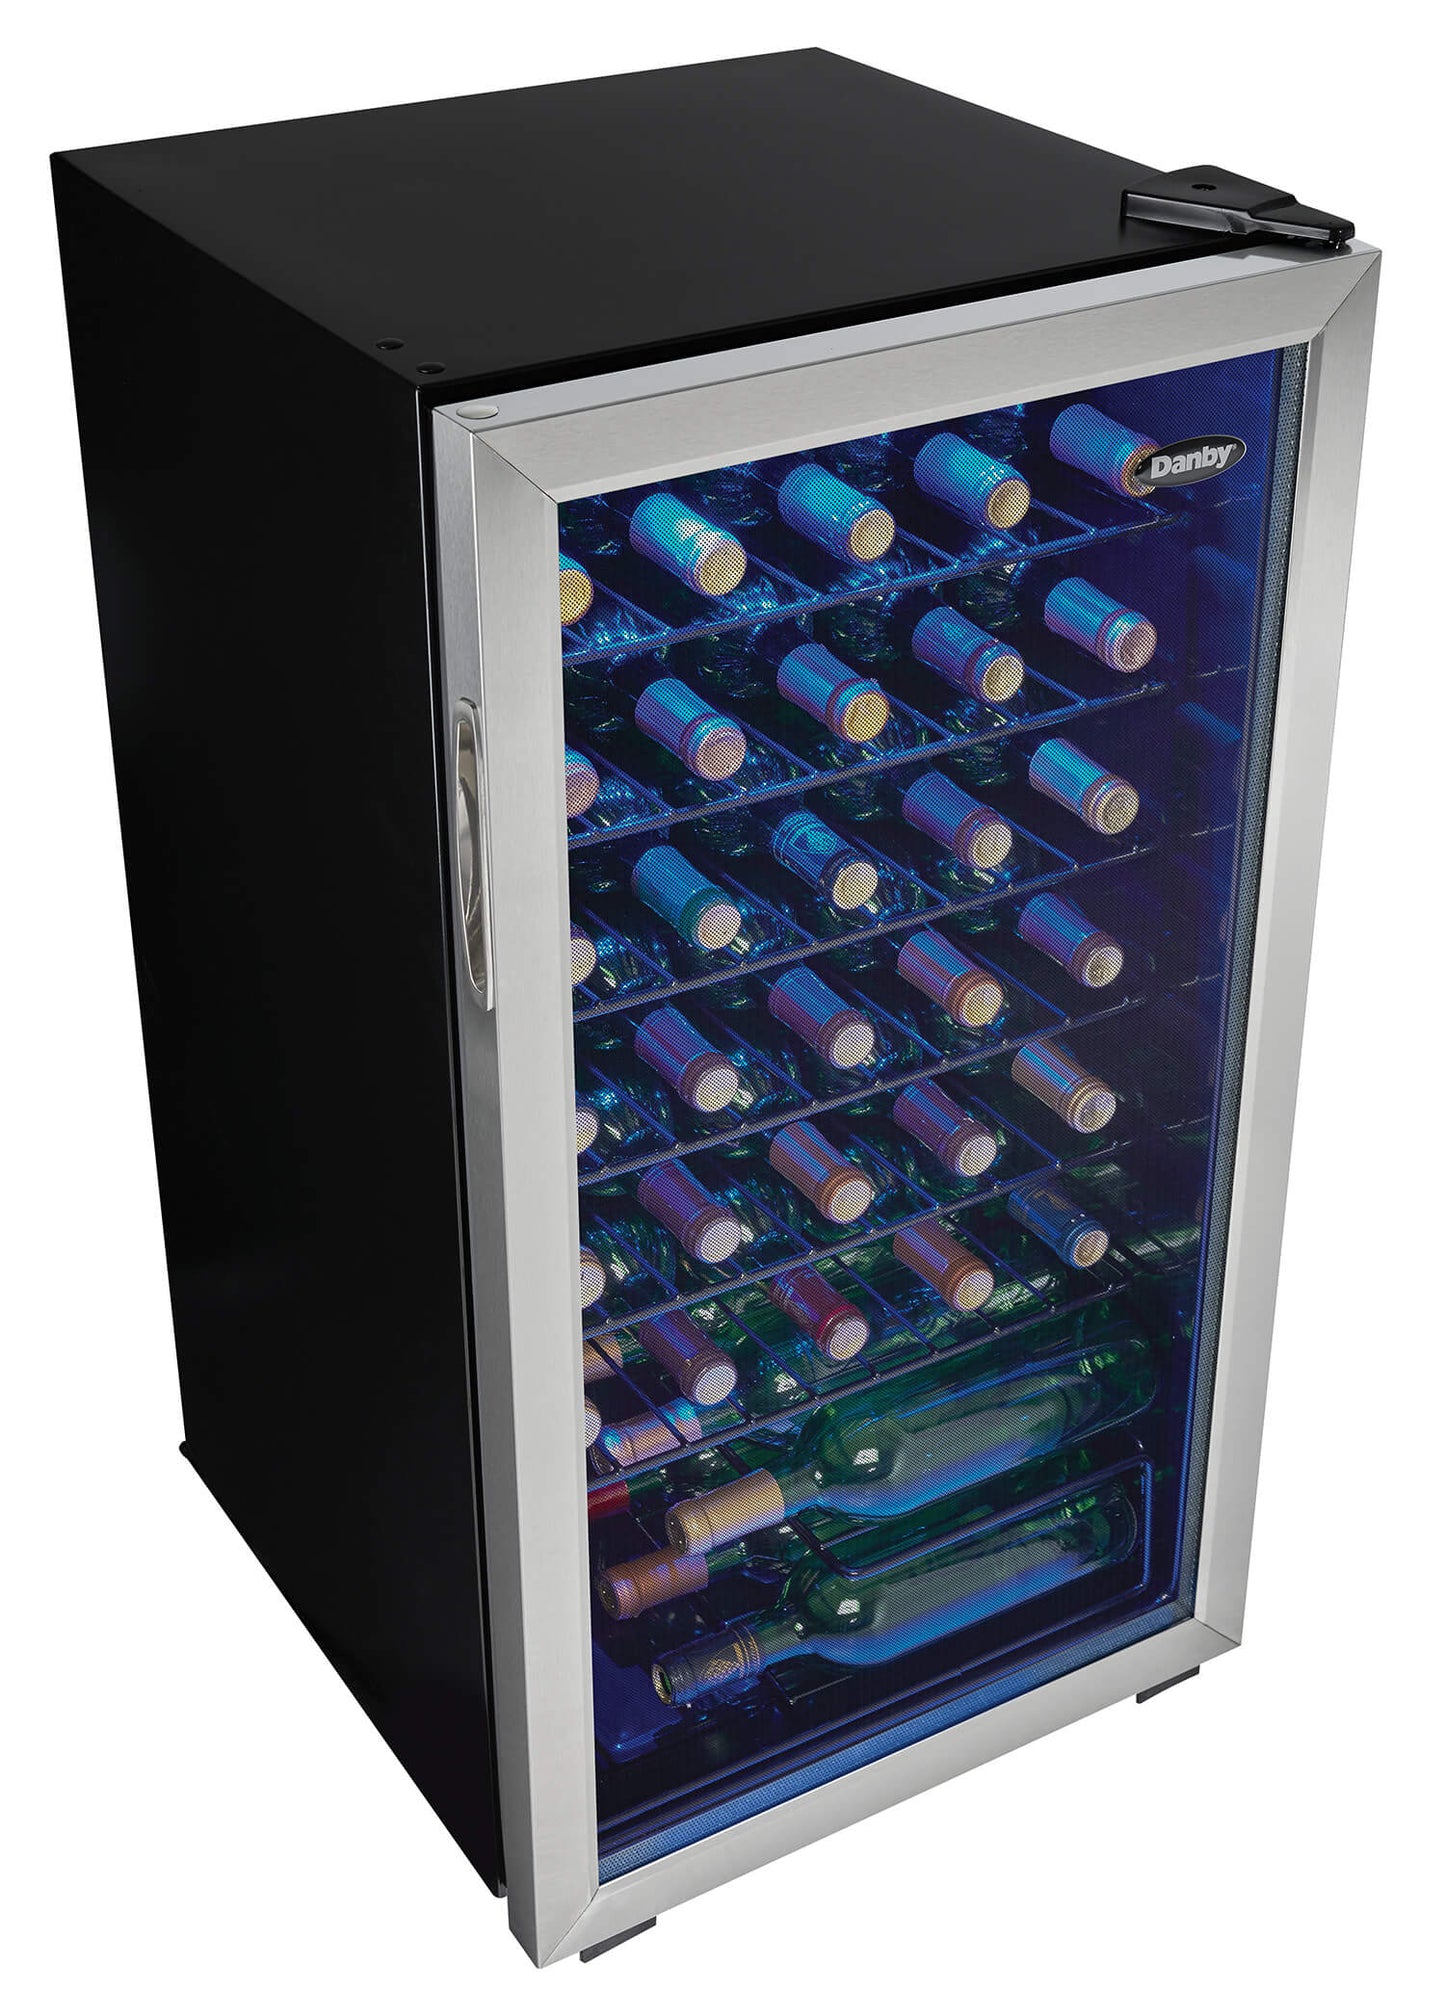 Danby 36 Bottle Free-Standing Wine Cooler in Stainless Steel - DWC036A1BSSDB-6